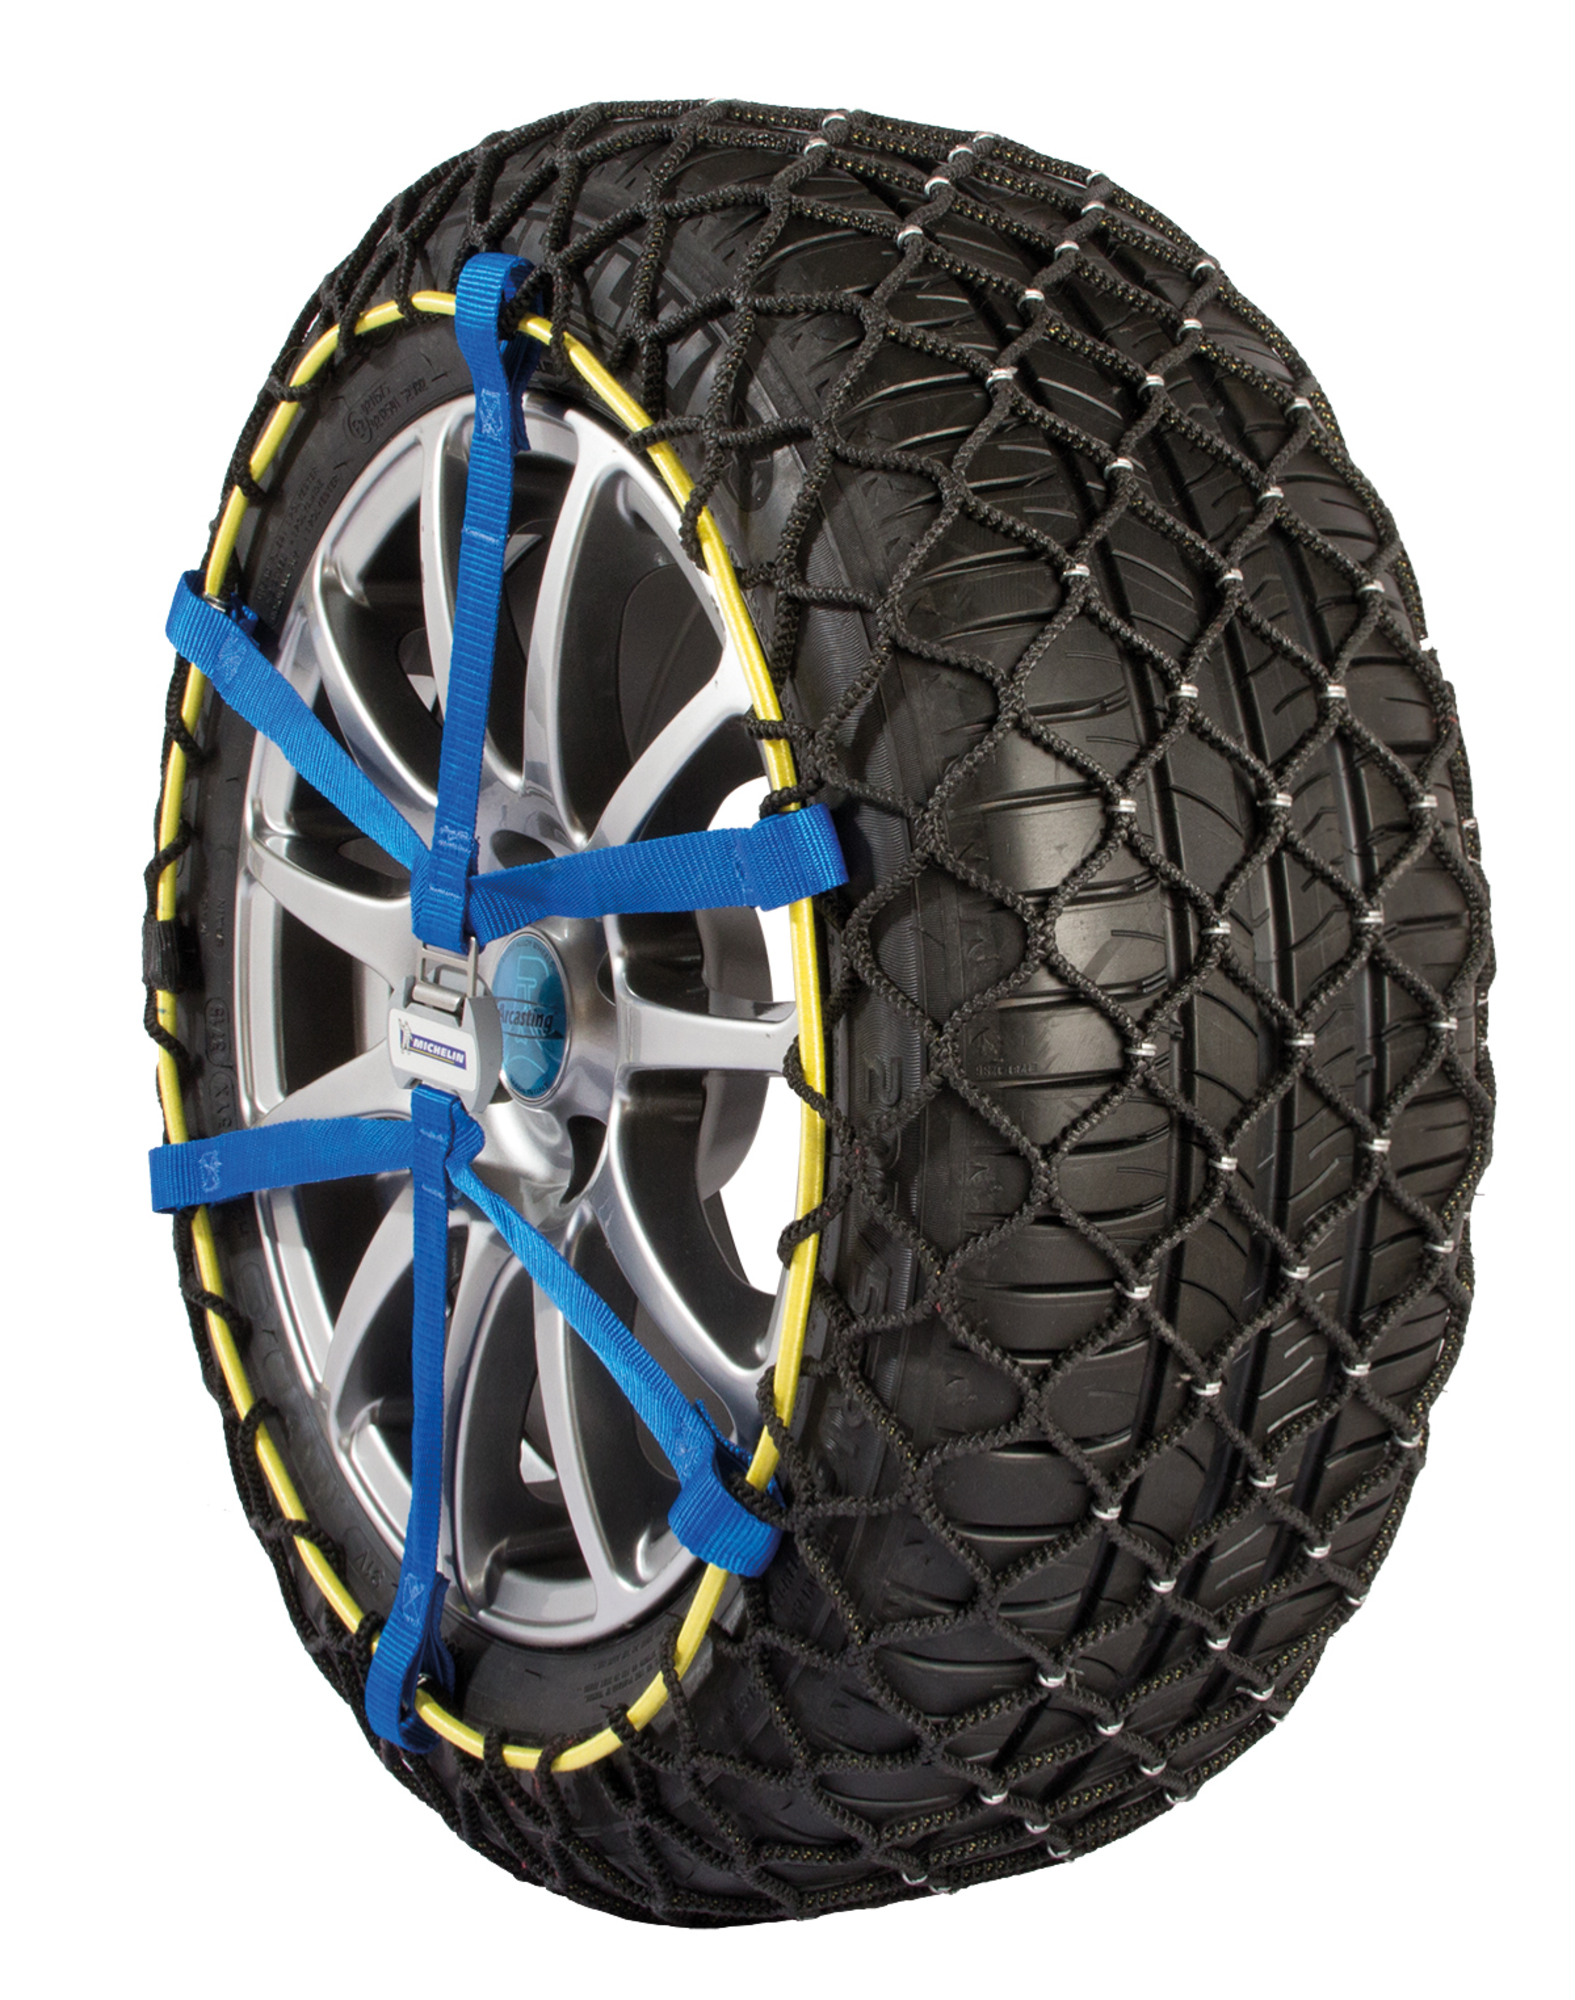 Chaines-neige Easy Grip Michelin 17"/18"